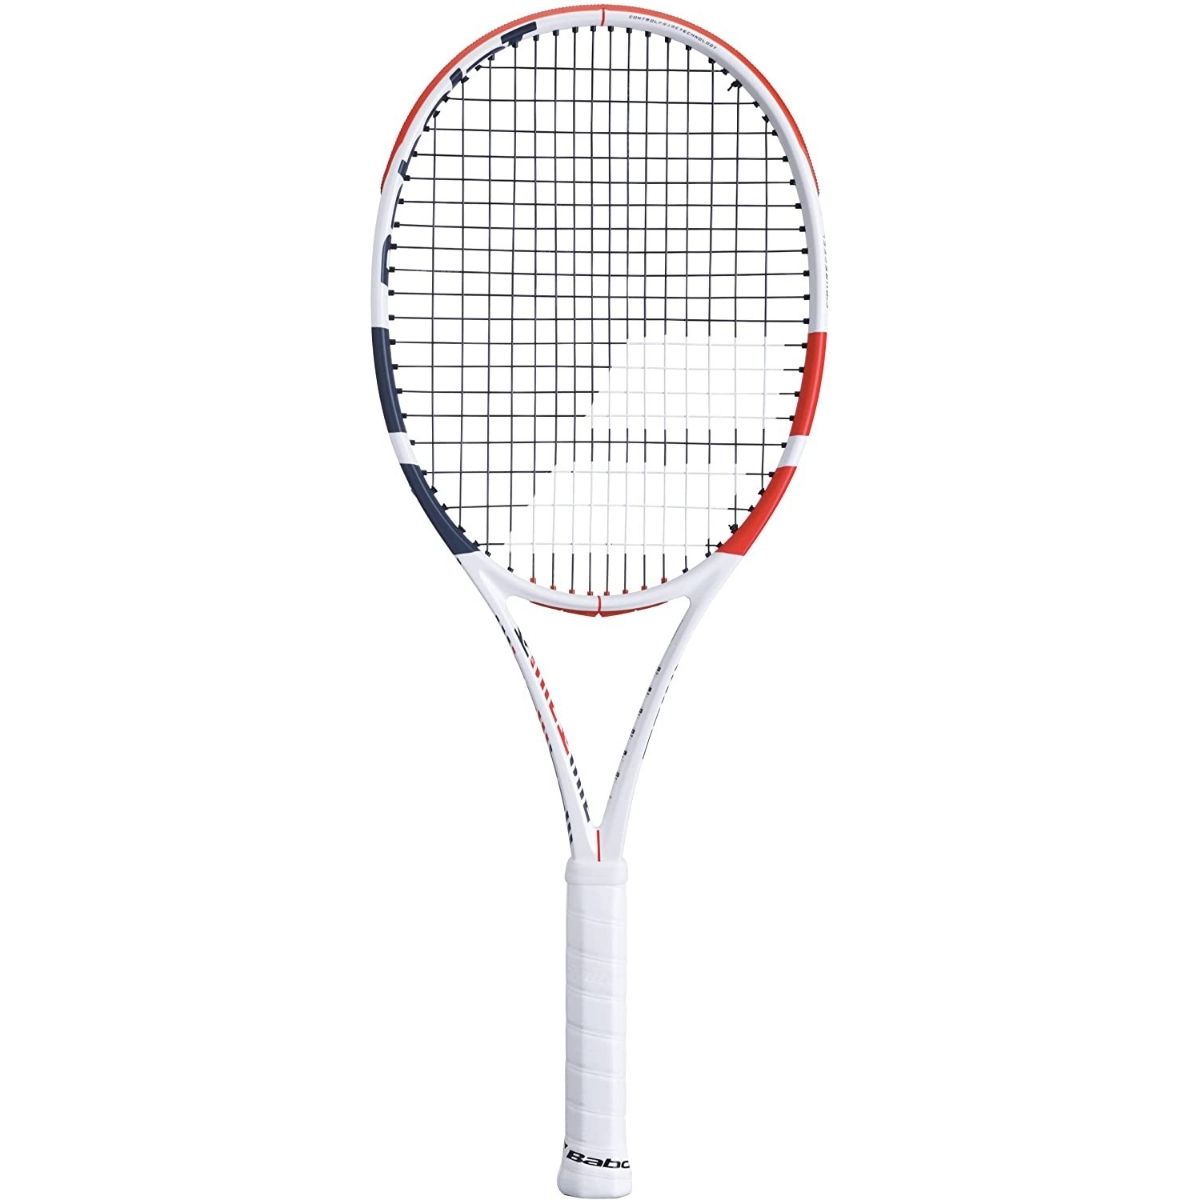 Babolat Pure Strike 100 tennis racket review